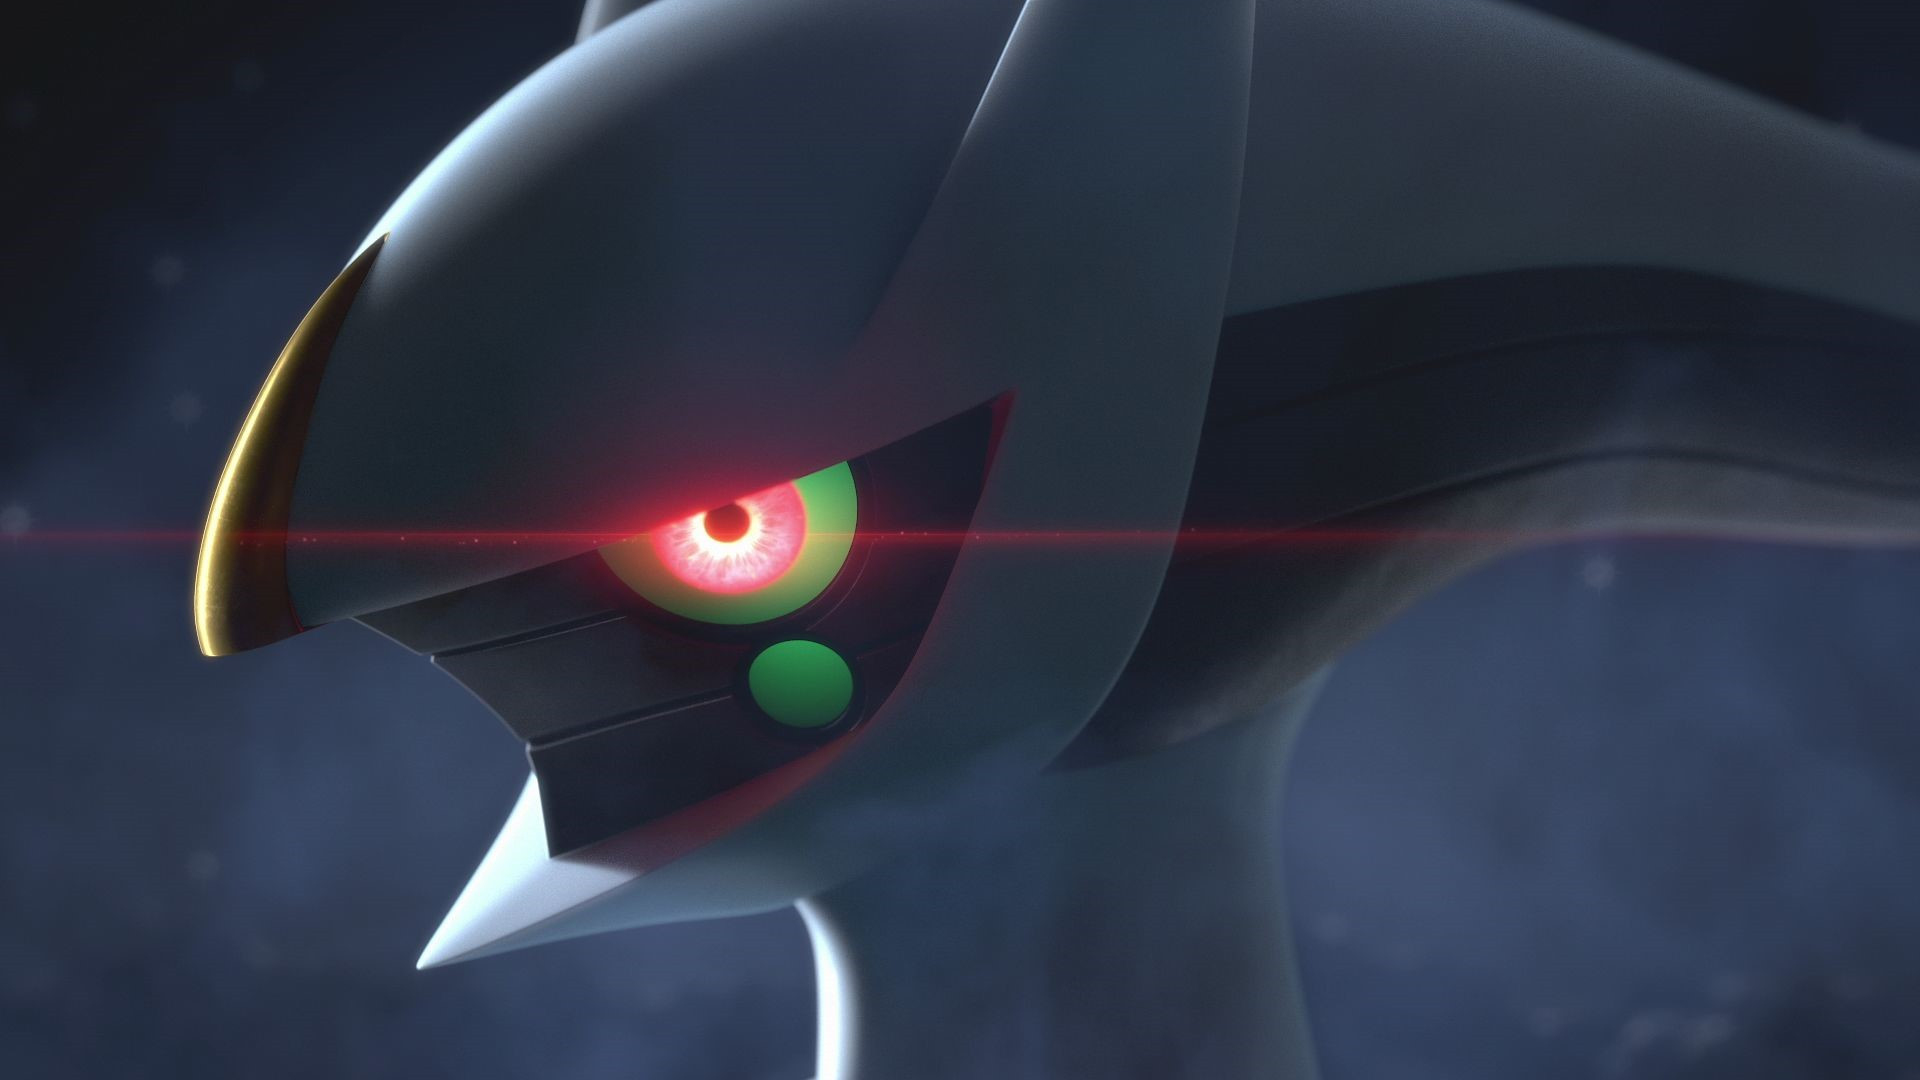 Is there multiplayer in Pokémon Legends: Arceus?